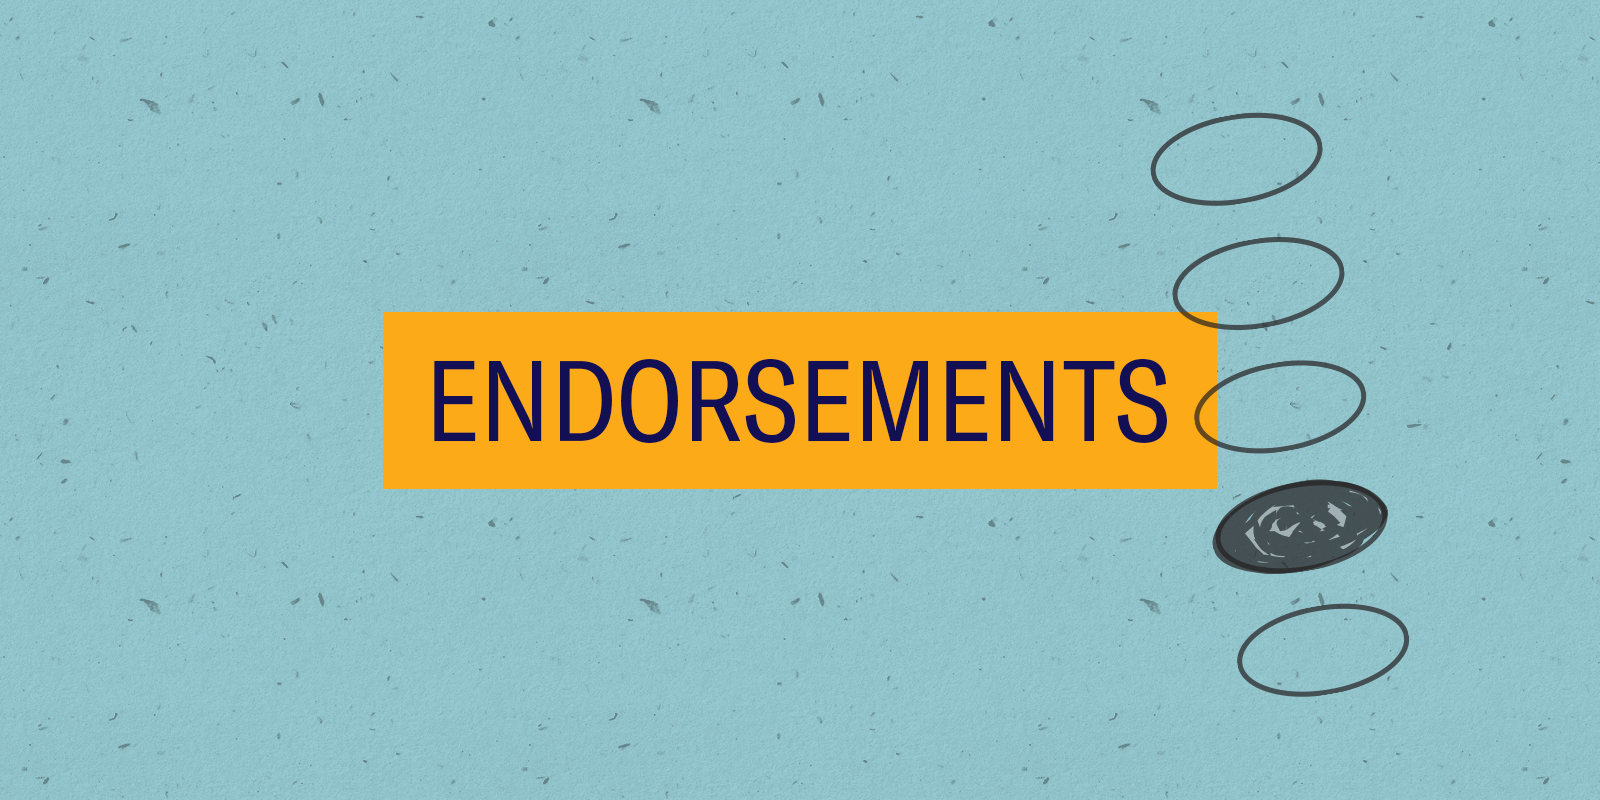 The word 'Endorsements' in navy font in an orange rectangle on a textured light blue background